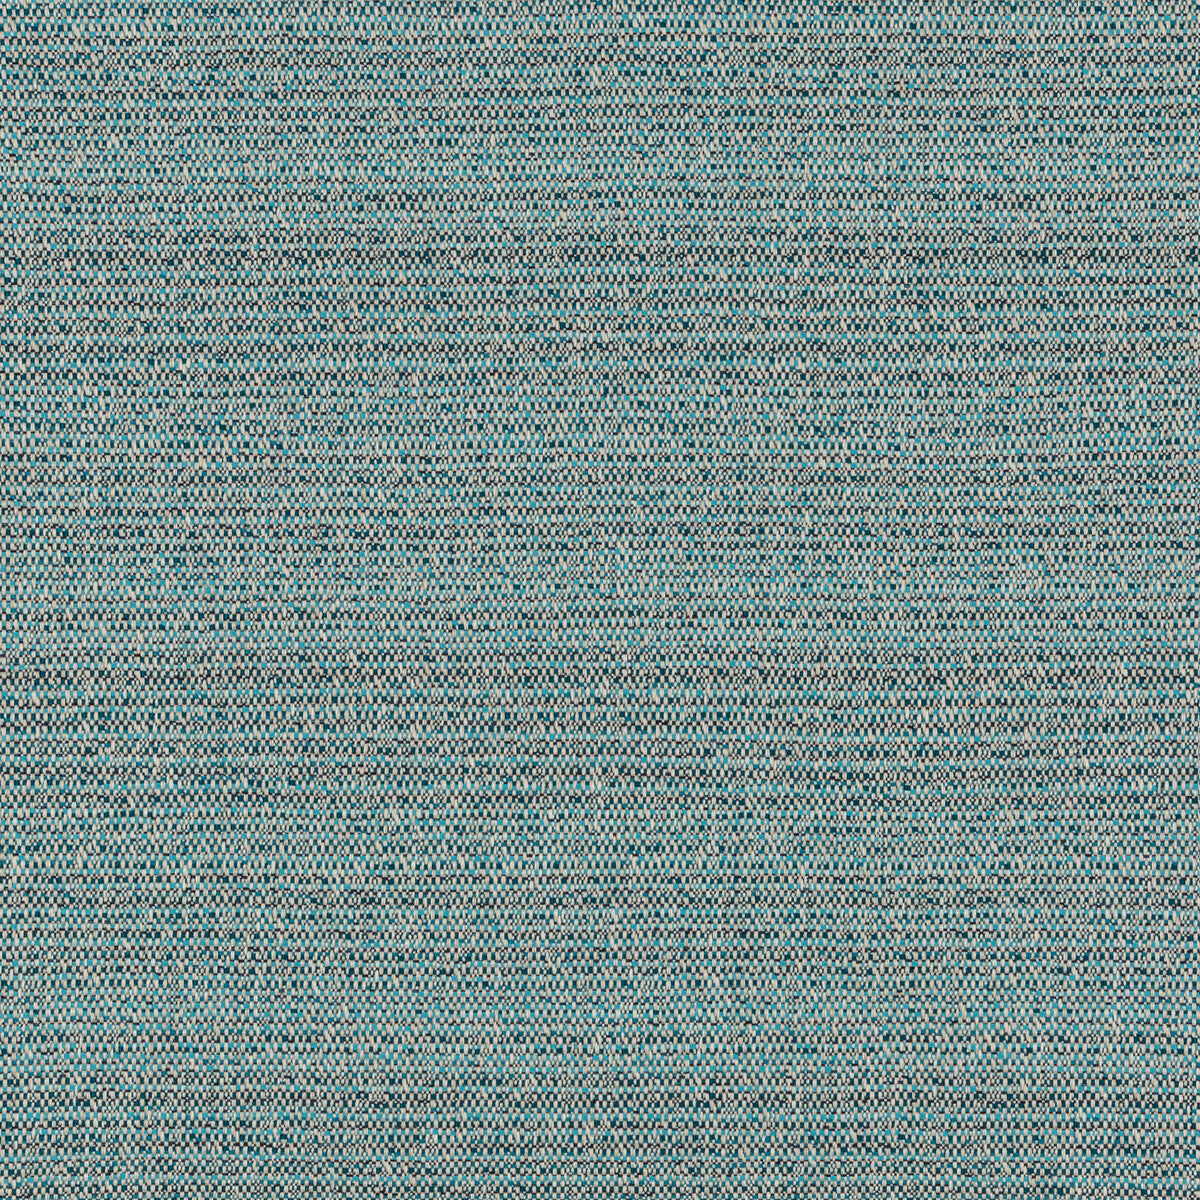 Halau fabric in lagoon color - pattern 35566.1635.0 - by Kravet Couture in the Vista collection